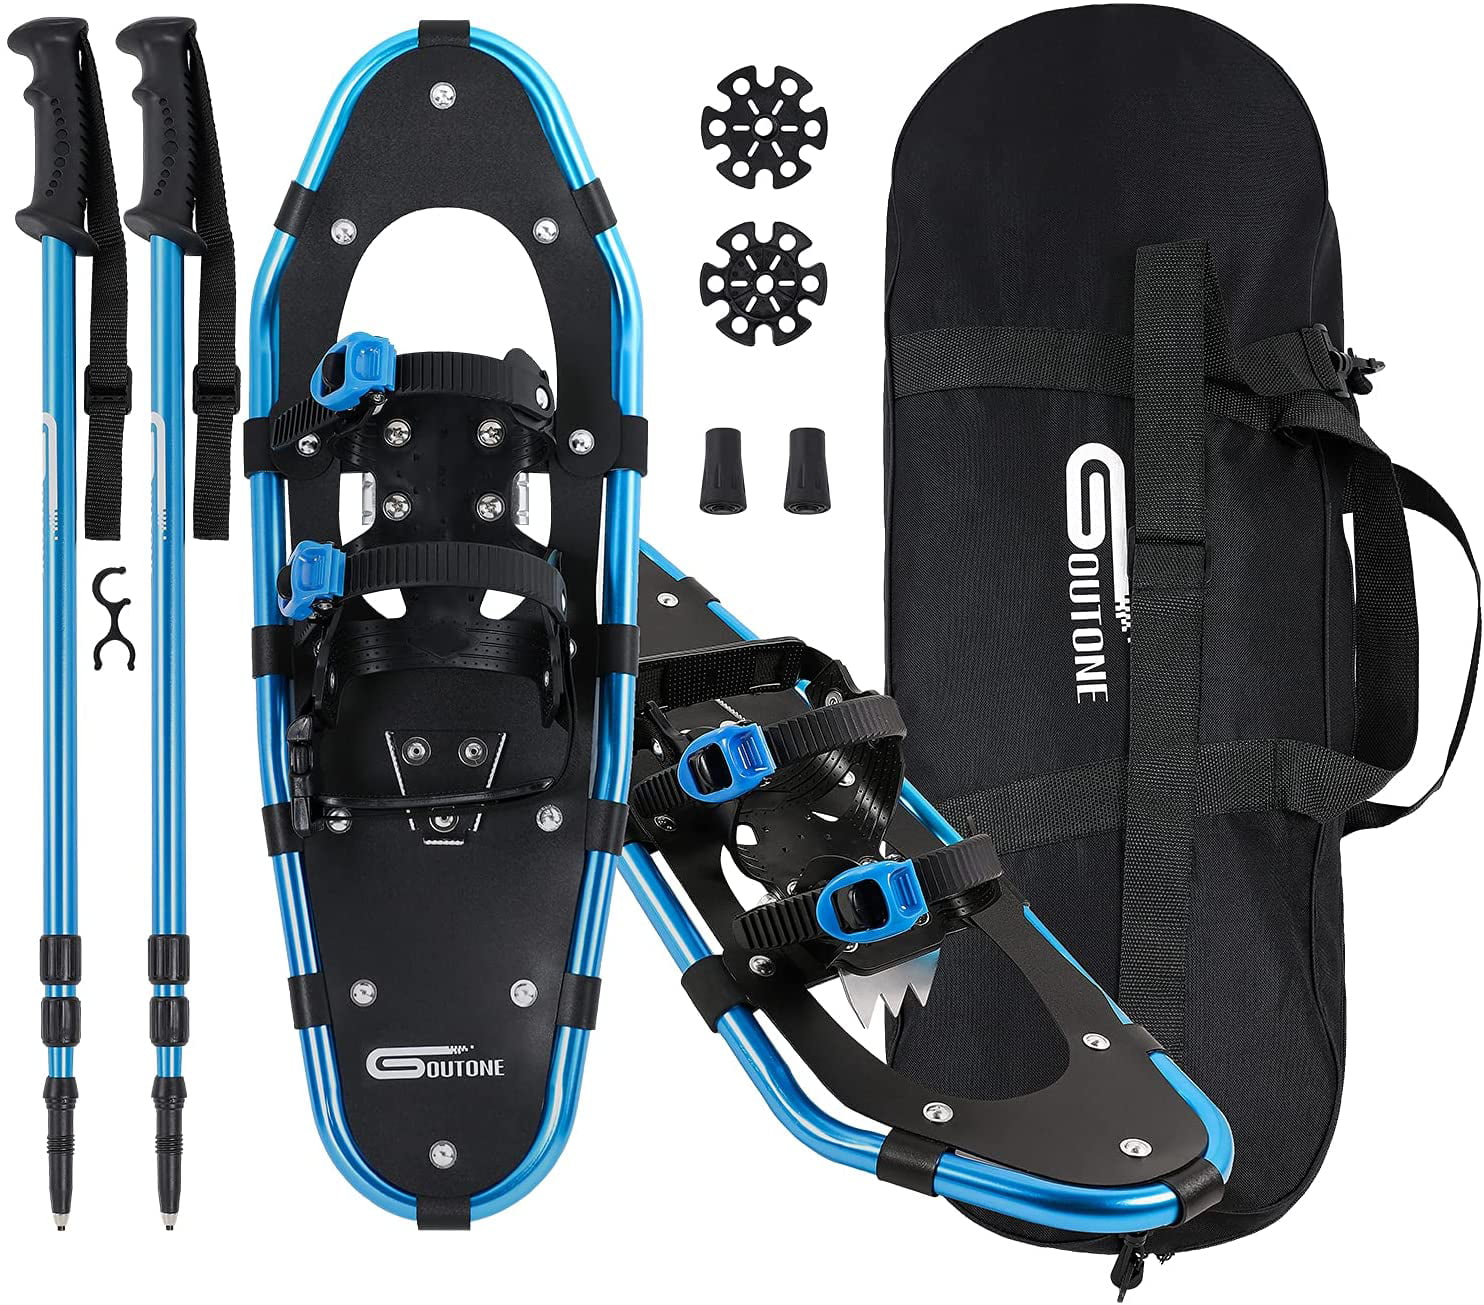 26 Snowshoes for Men Women Youth Kids Lightweight Aluminum Alloy All Terrain Snow Shoes with Adjustable Ratchet Bindings with Carrying Tote Bag